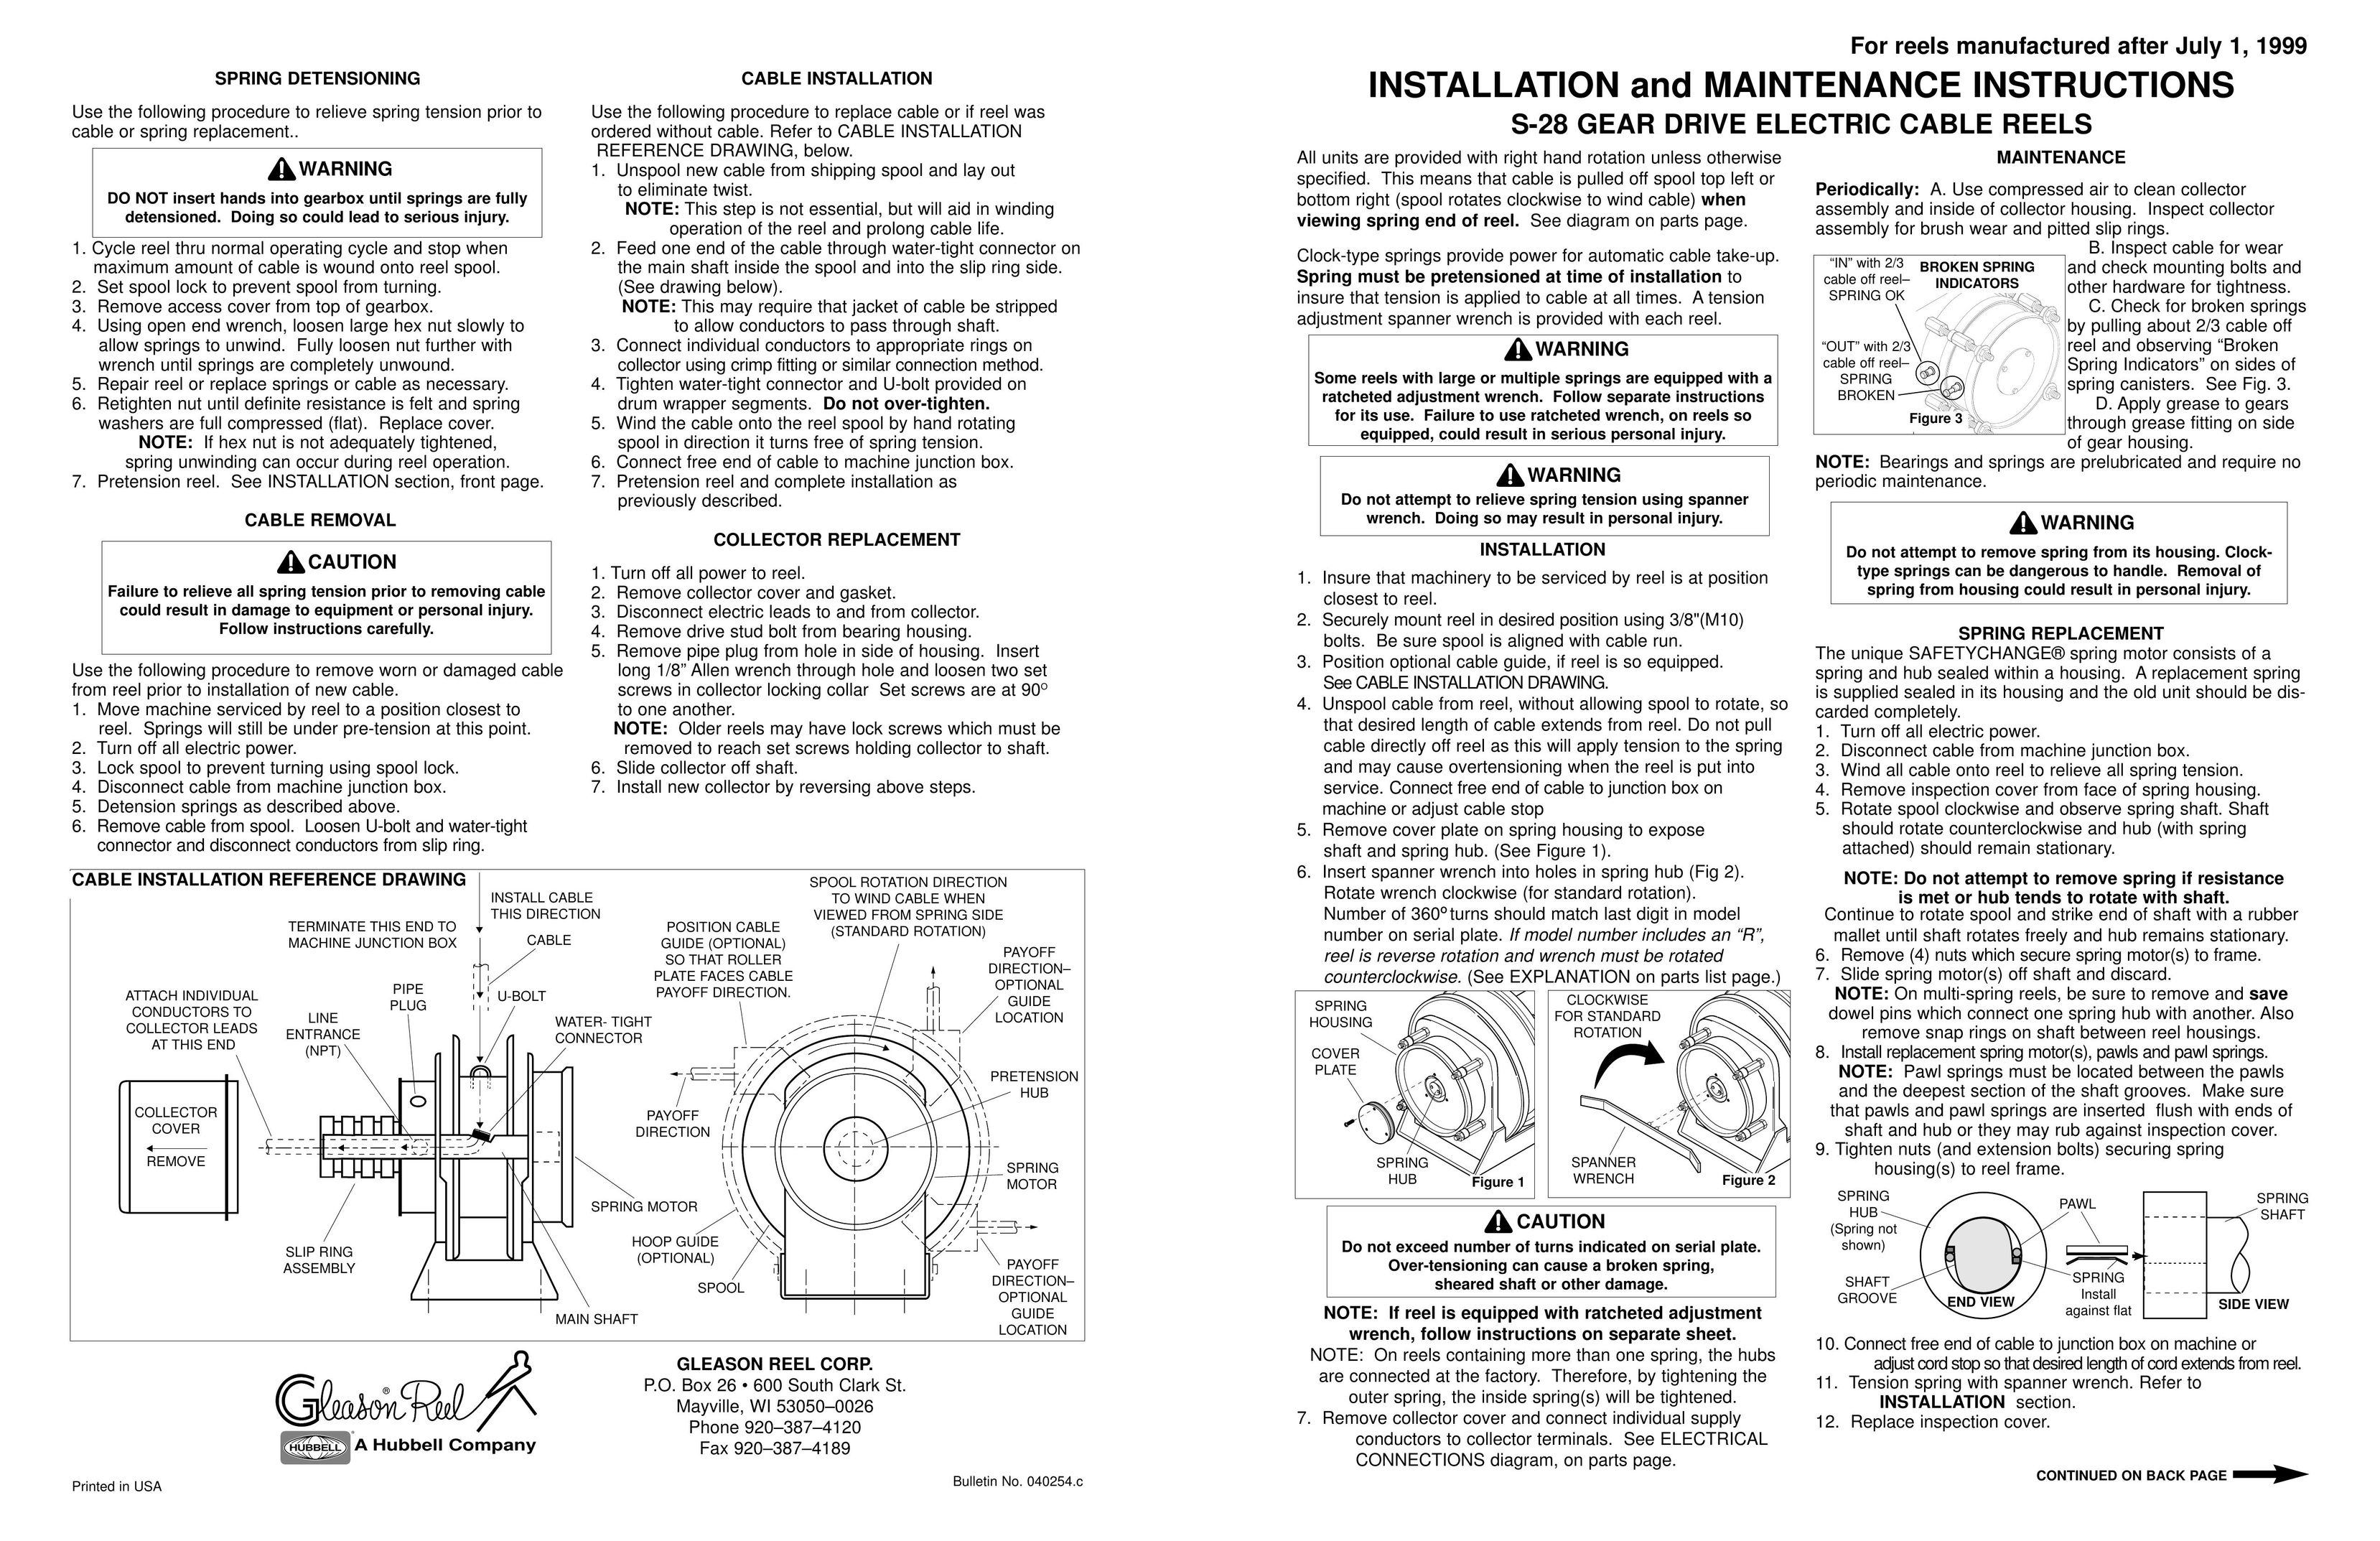 Hubbell S-28 Stereo System User Manual